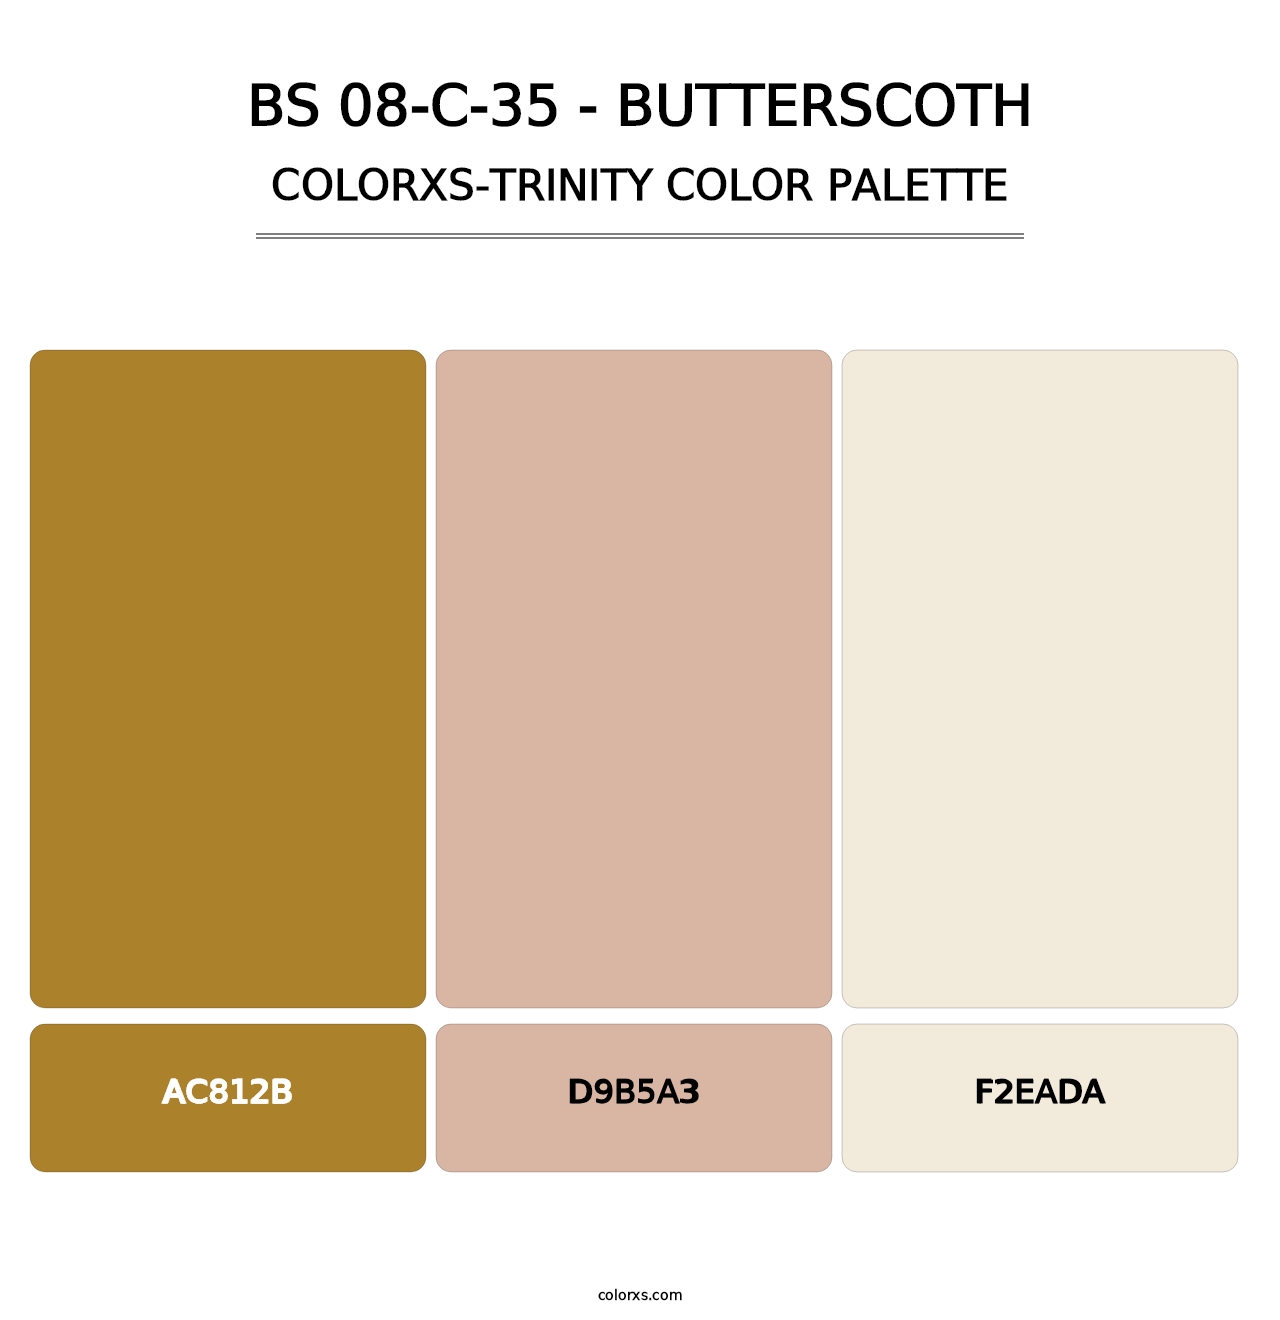 BS 08-C-35 - Butterscoth - Colorxs Trinity Palette